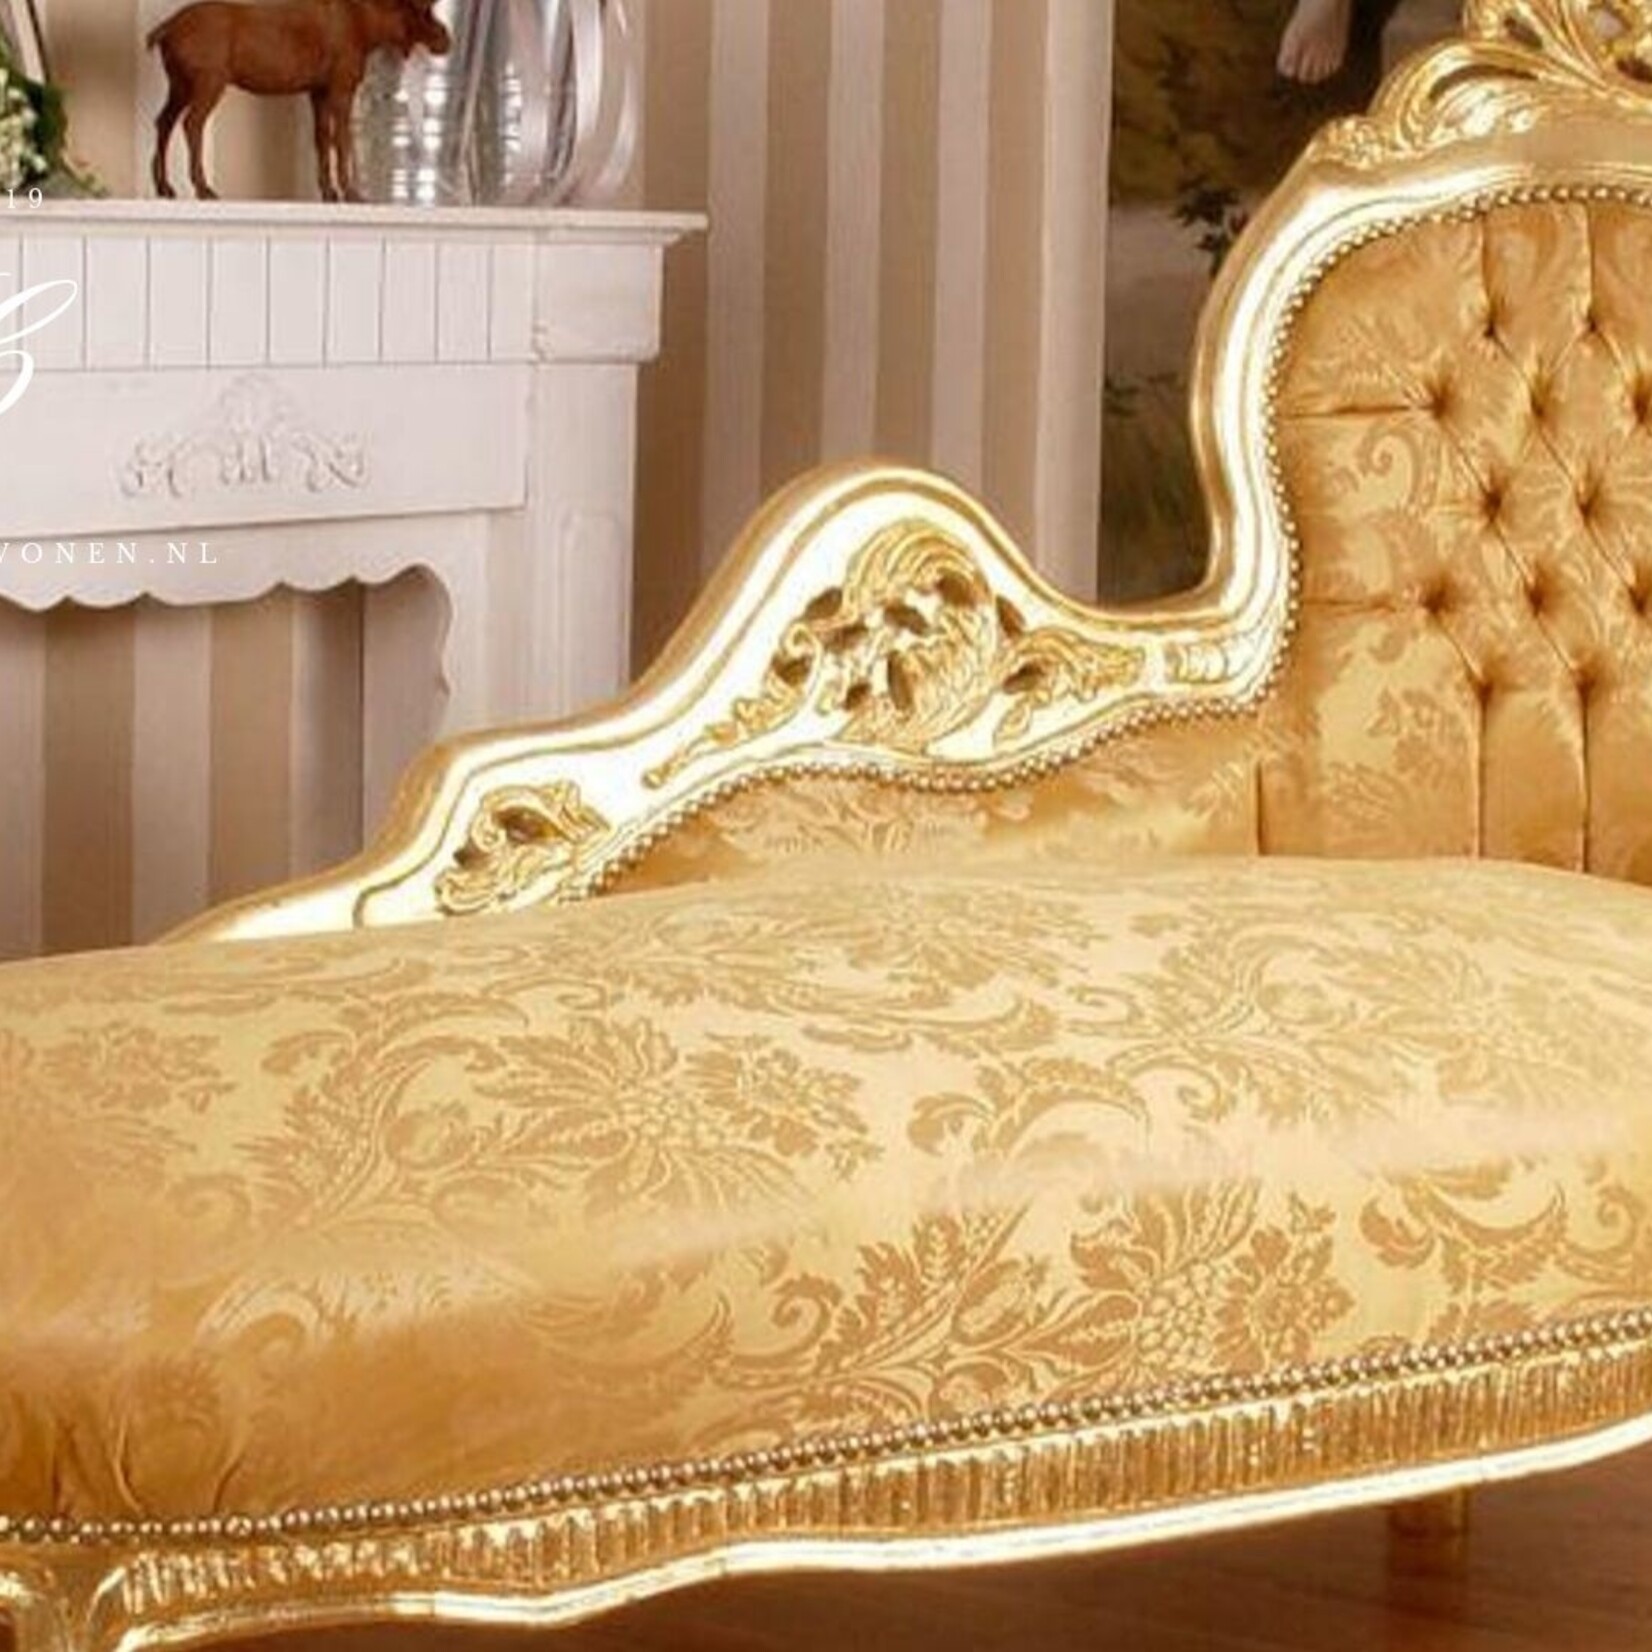 LC Barok chaise lounge exclusive